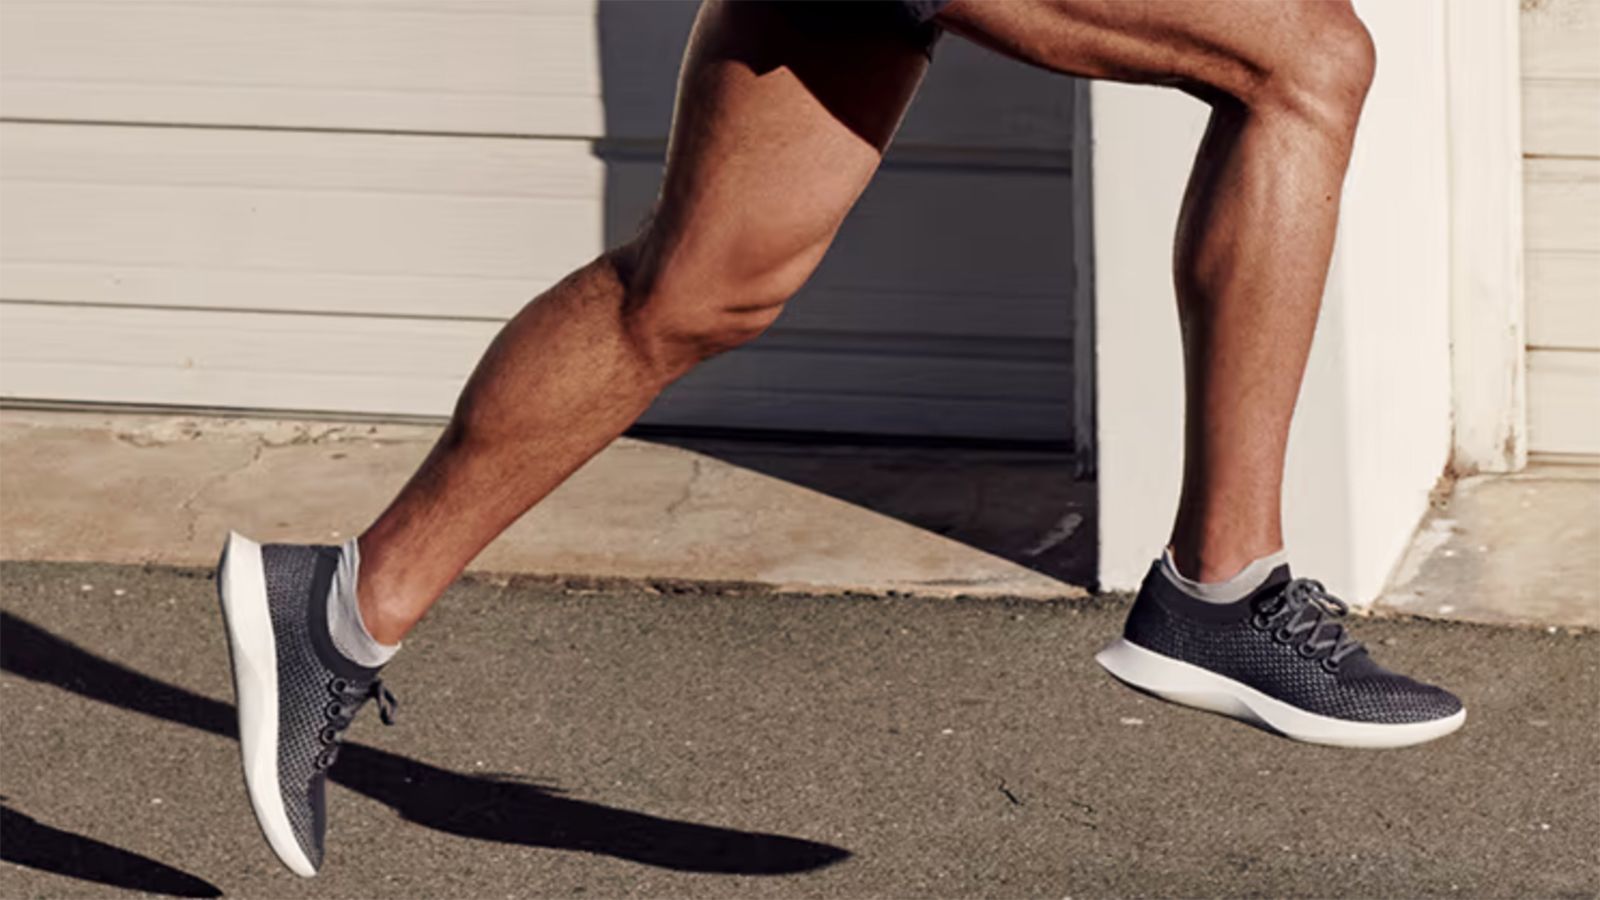 Celebrate spring’s arrival with up to 25% off Allbirds’ sneakers, sustainable workout gear and more | CNN Underscored